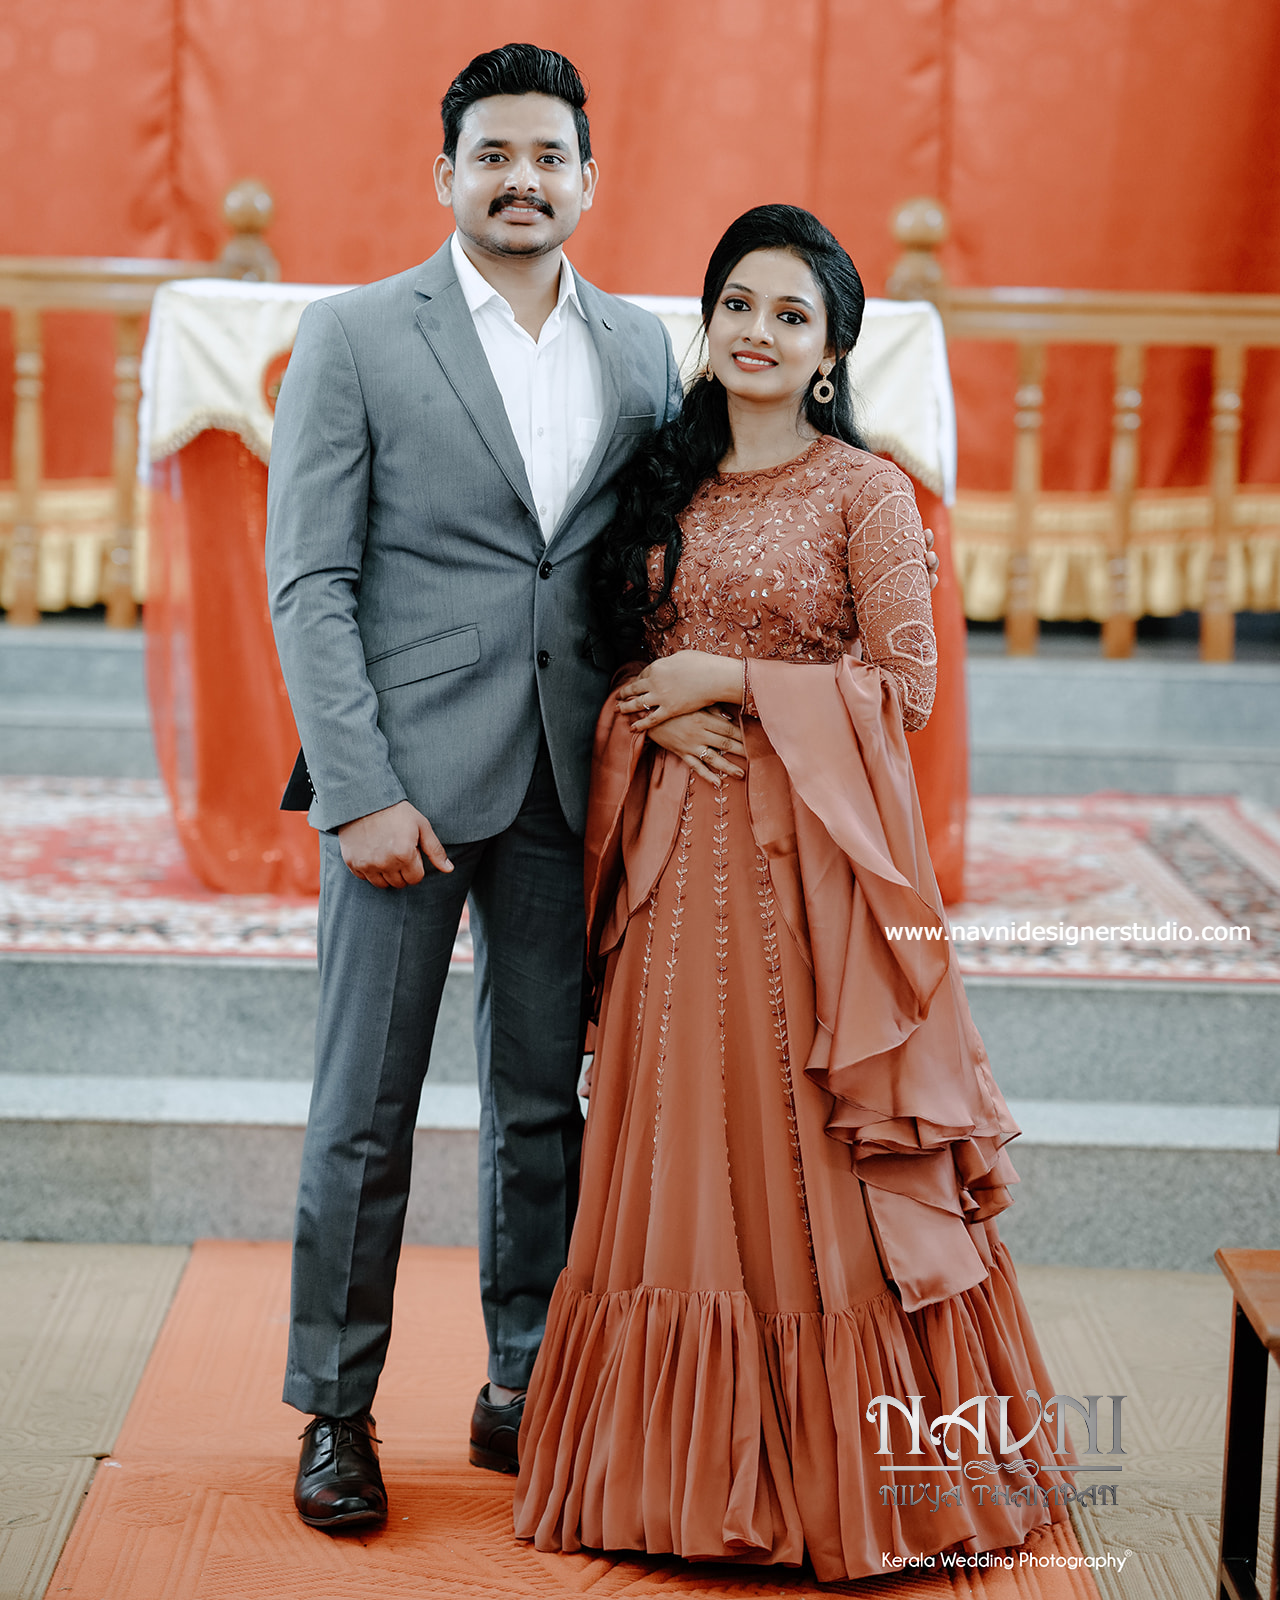 Traditional kerala bride and groom | Engagement dress for groom, Wedding  reception dress, South indian bride